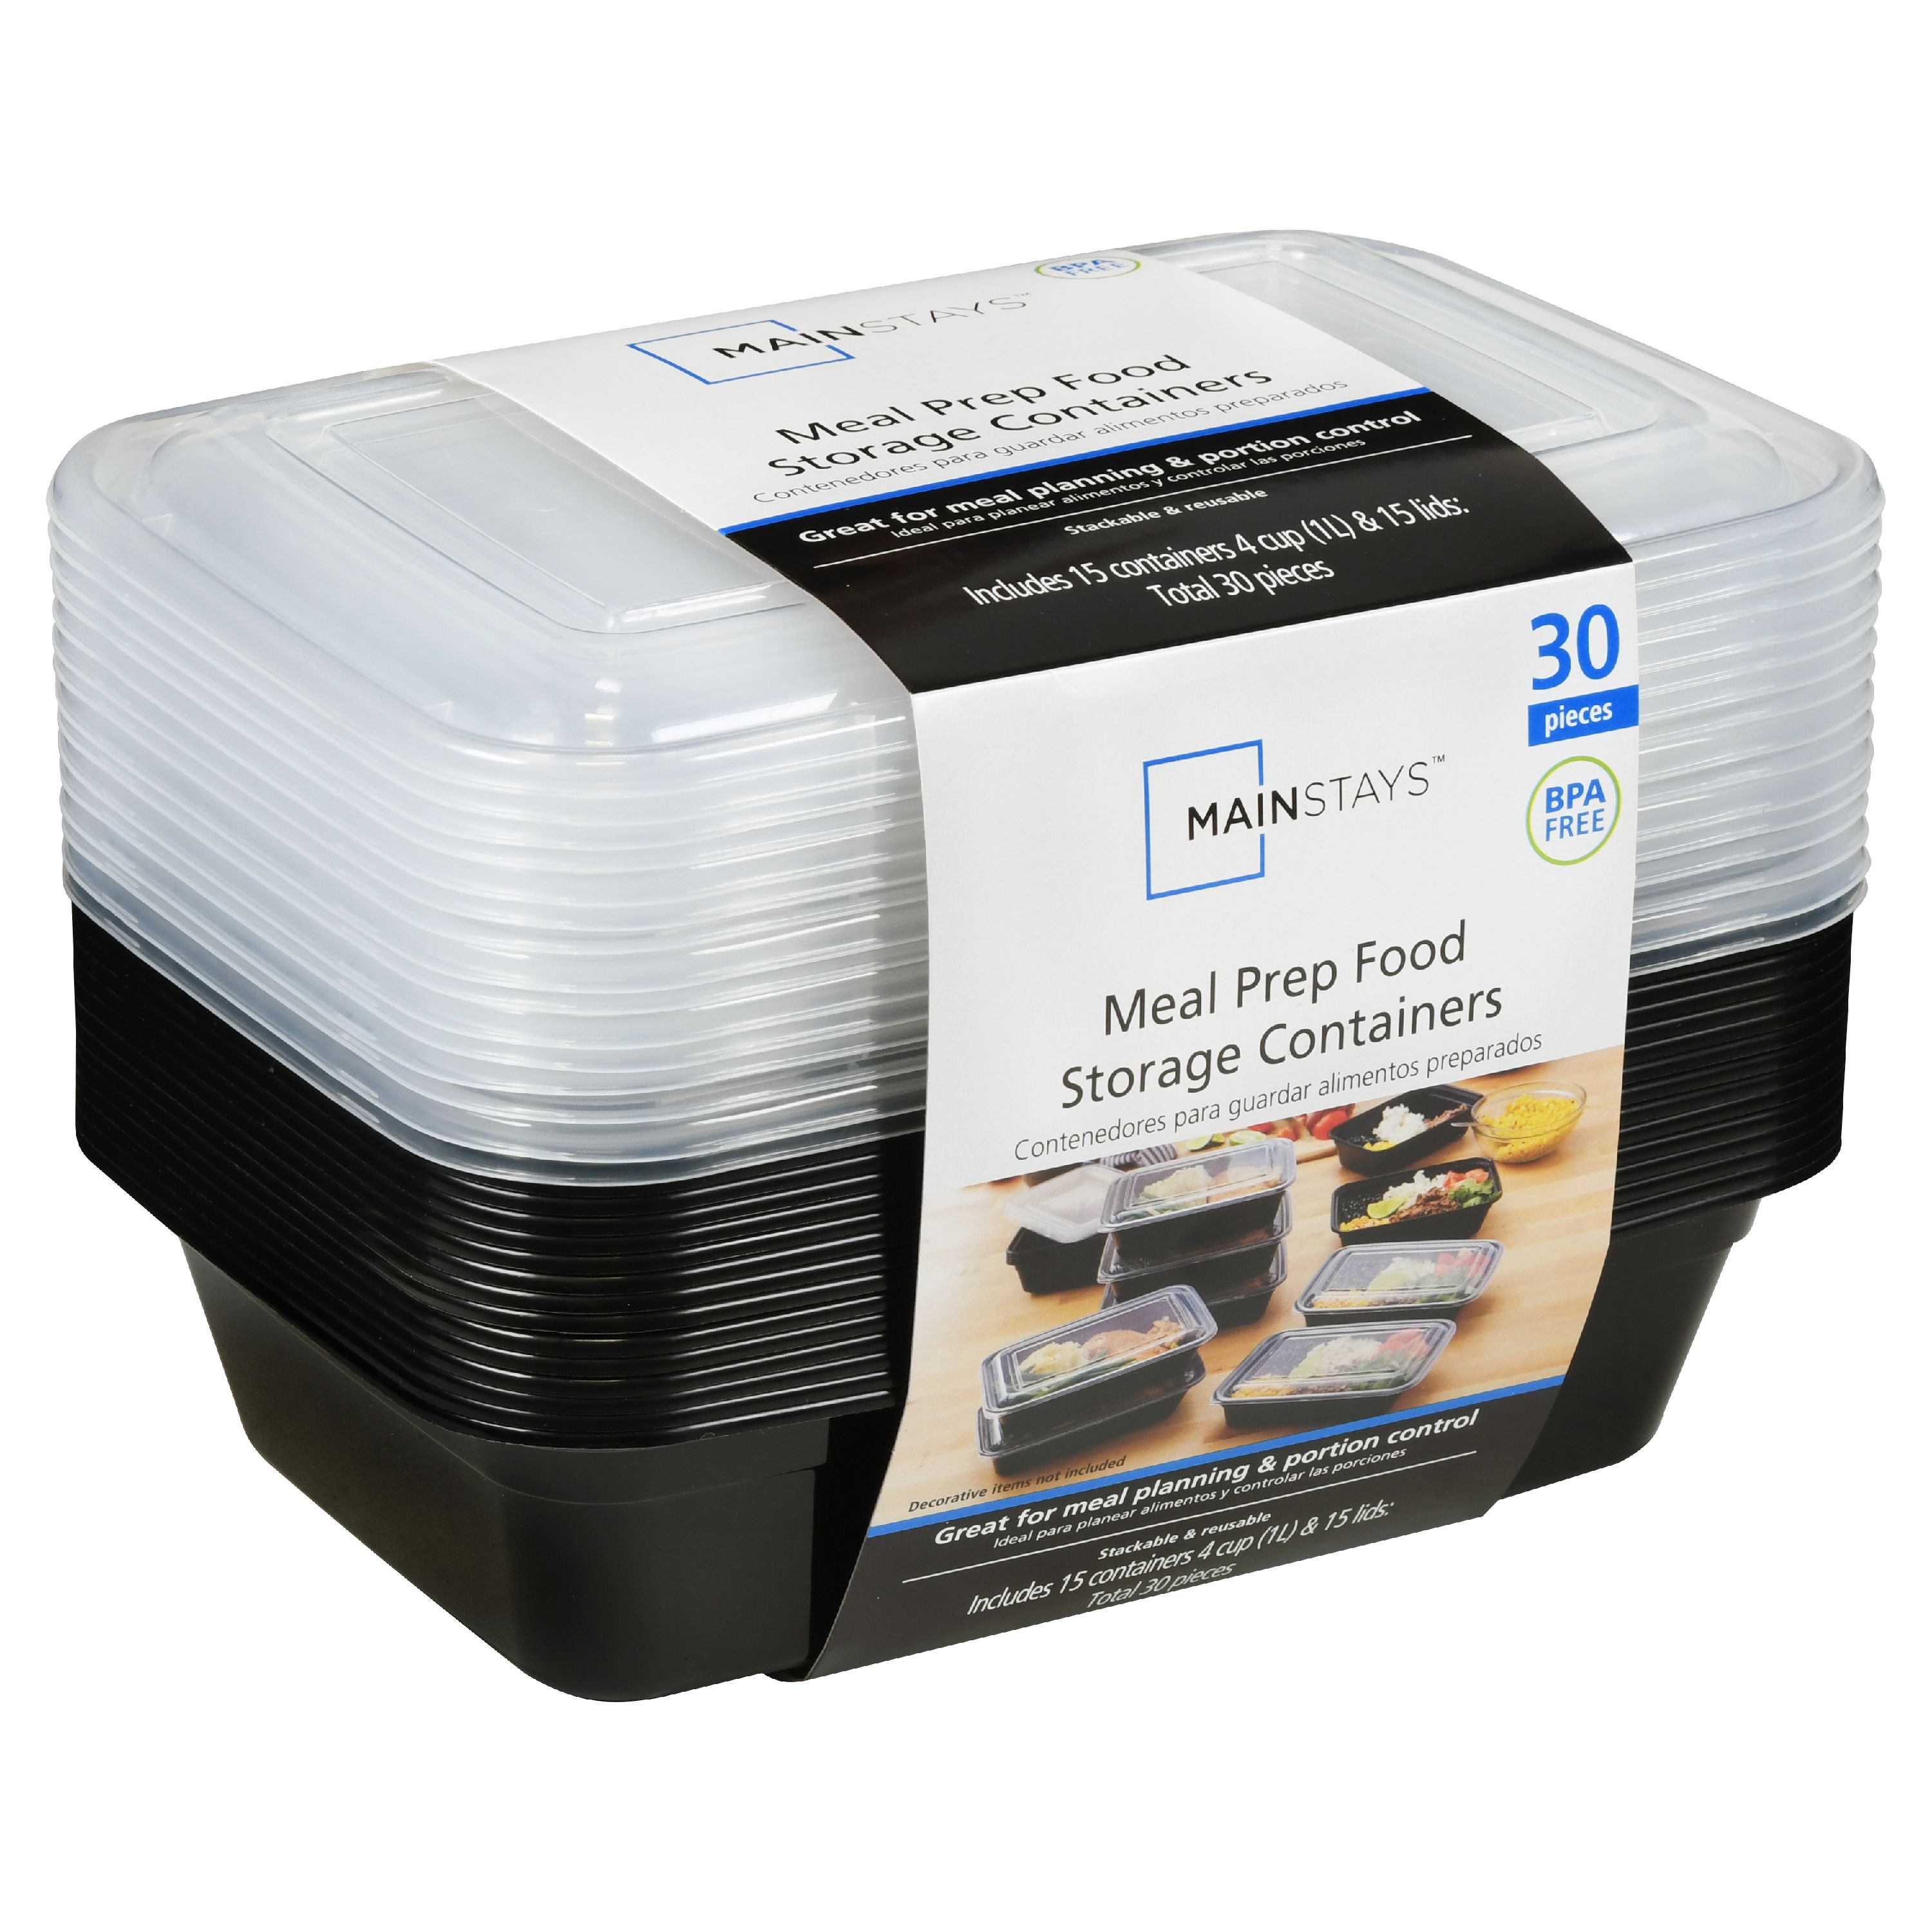 Mainstays Meal Prep Food Storage Containers, 15 Count - image 3 of 3